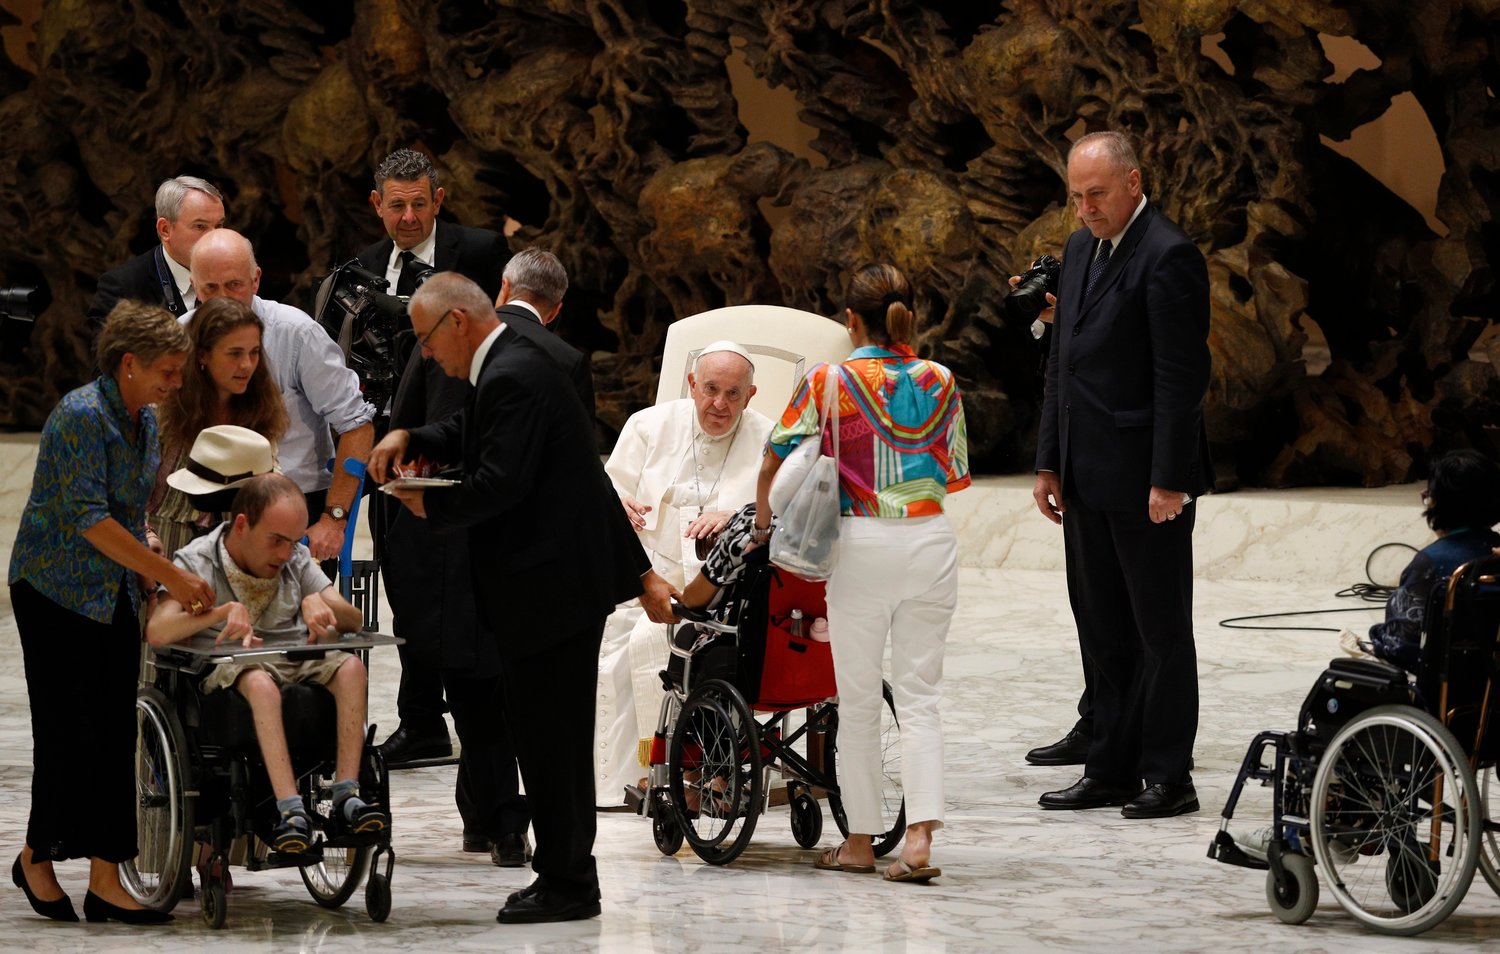 Pope Francis greets people in wheelchairs during his general audience in the Paul VI hall at the Vatican Aug. 3.